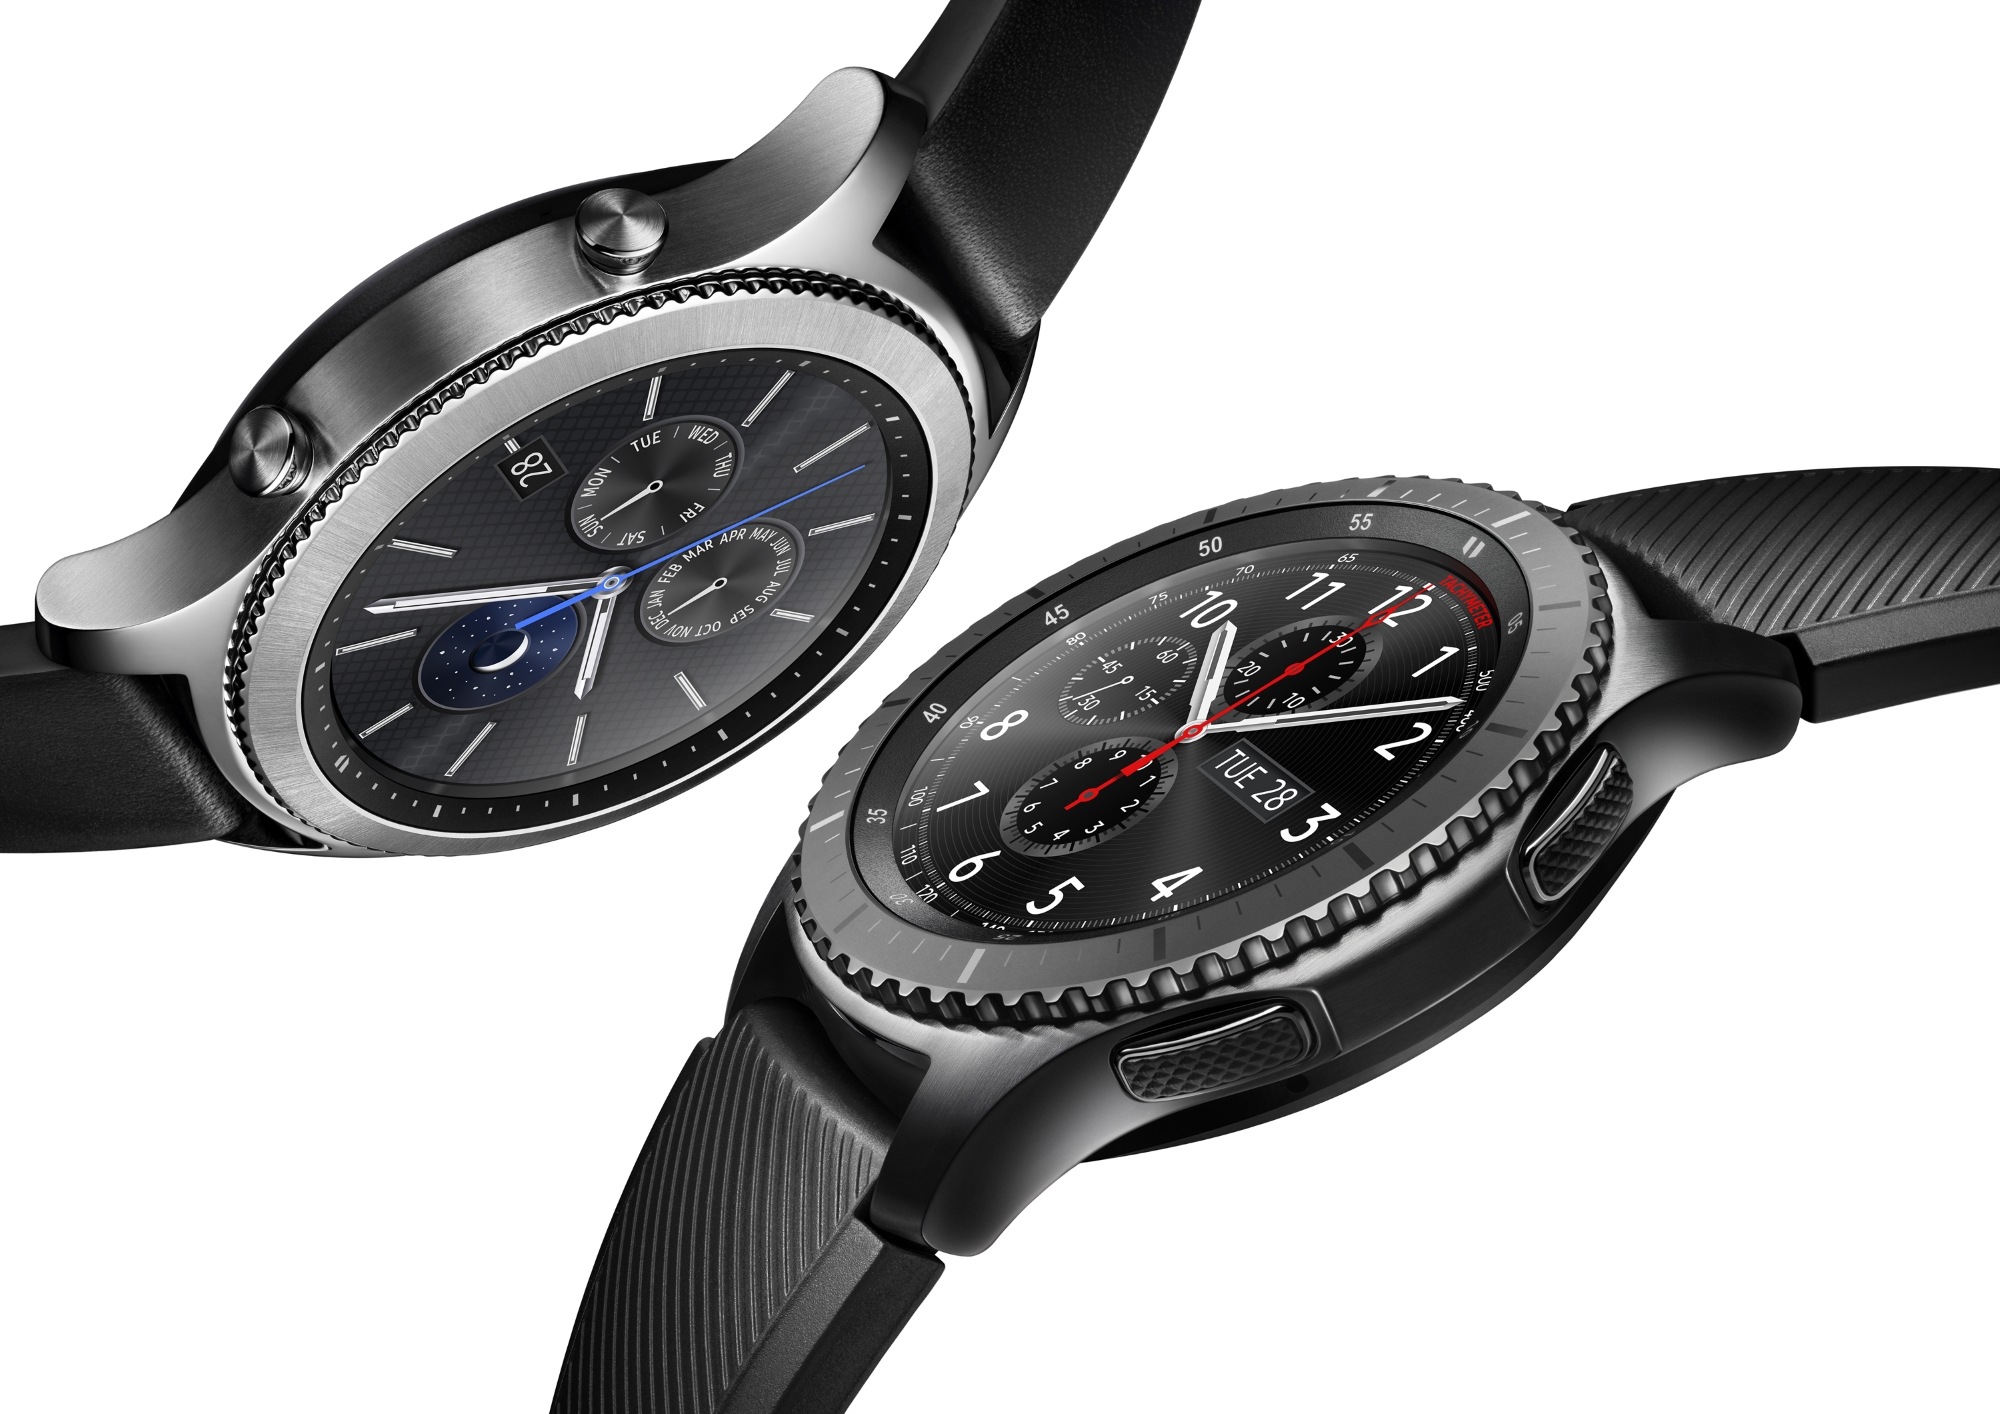 Samsung Finally Brings iOS App for Gear Smartwatches